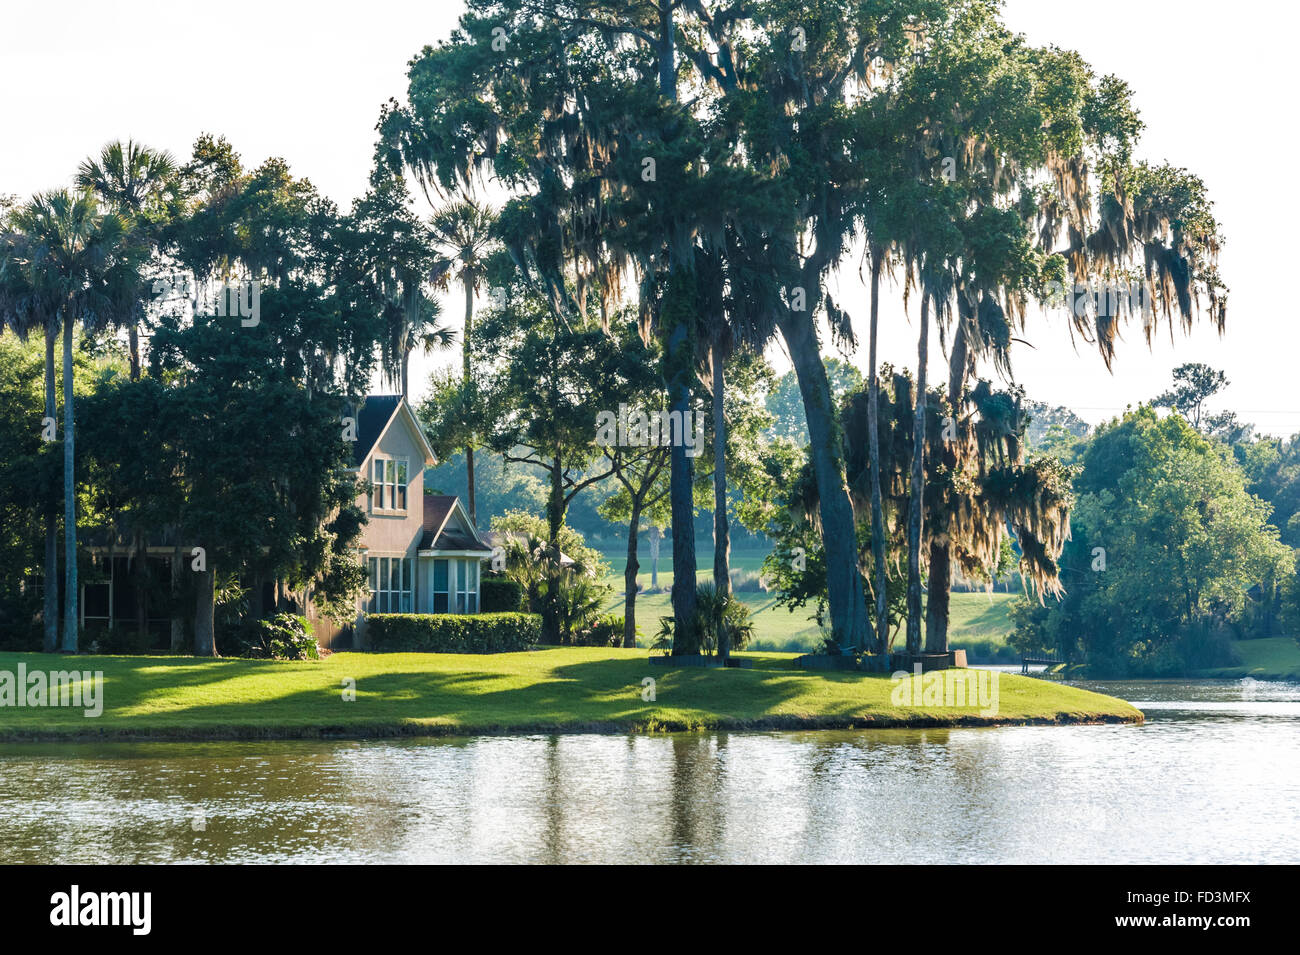 Prime Waterfront Immobilien am Sawgrass in Ponte Vedra Beach, Florida, USA. Stockfoto